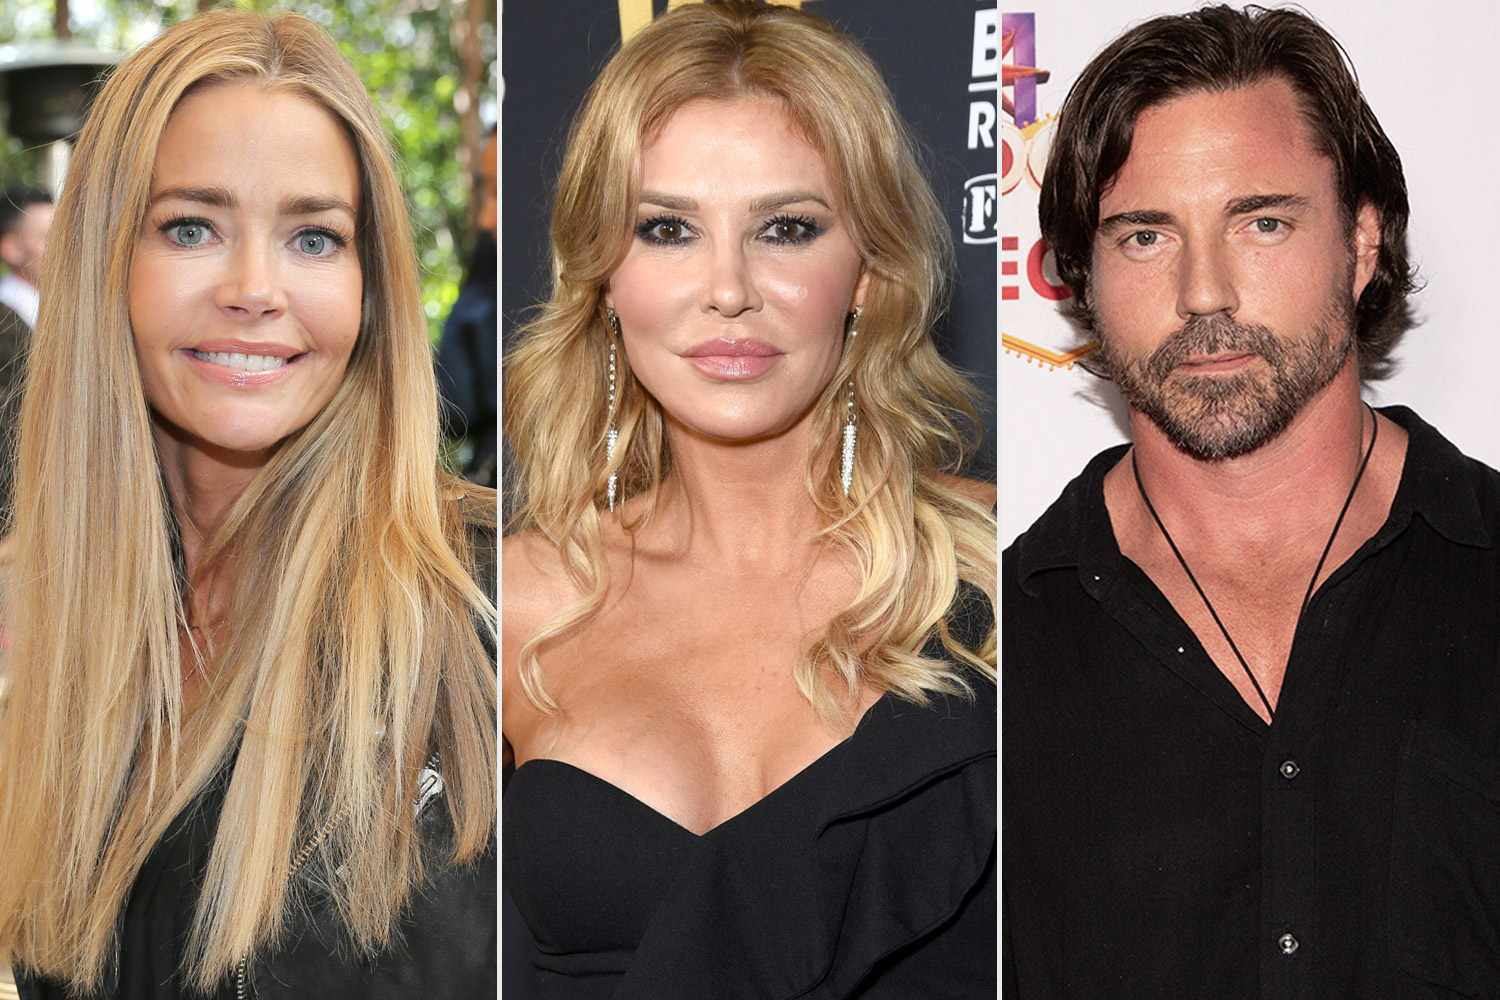 Brandi Glanville and Denise Richards with Aaron Phypers